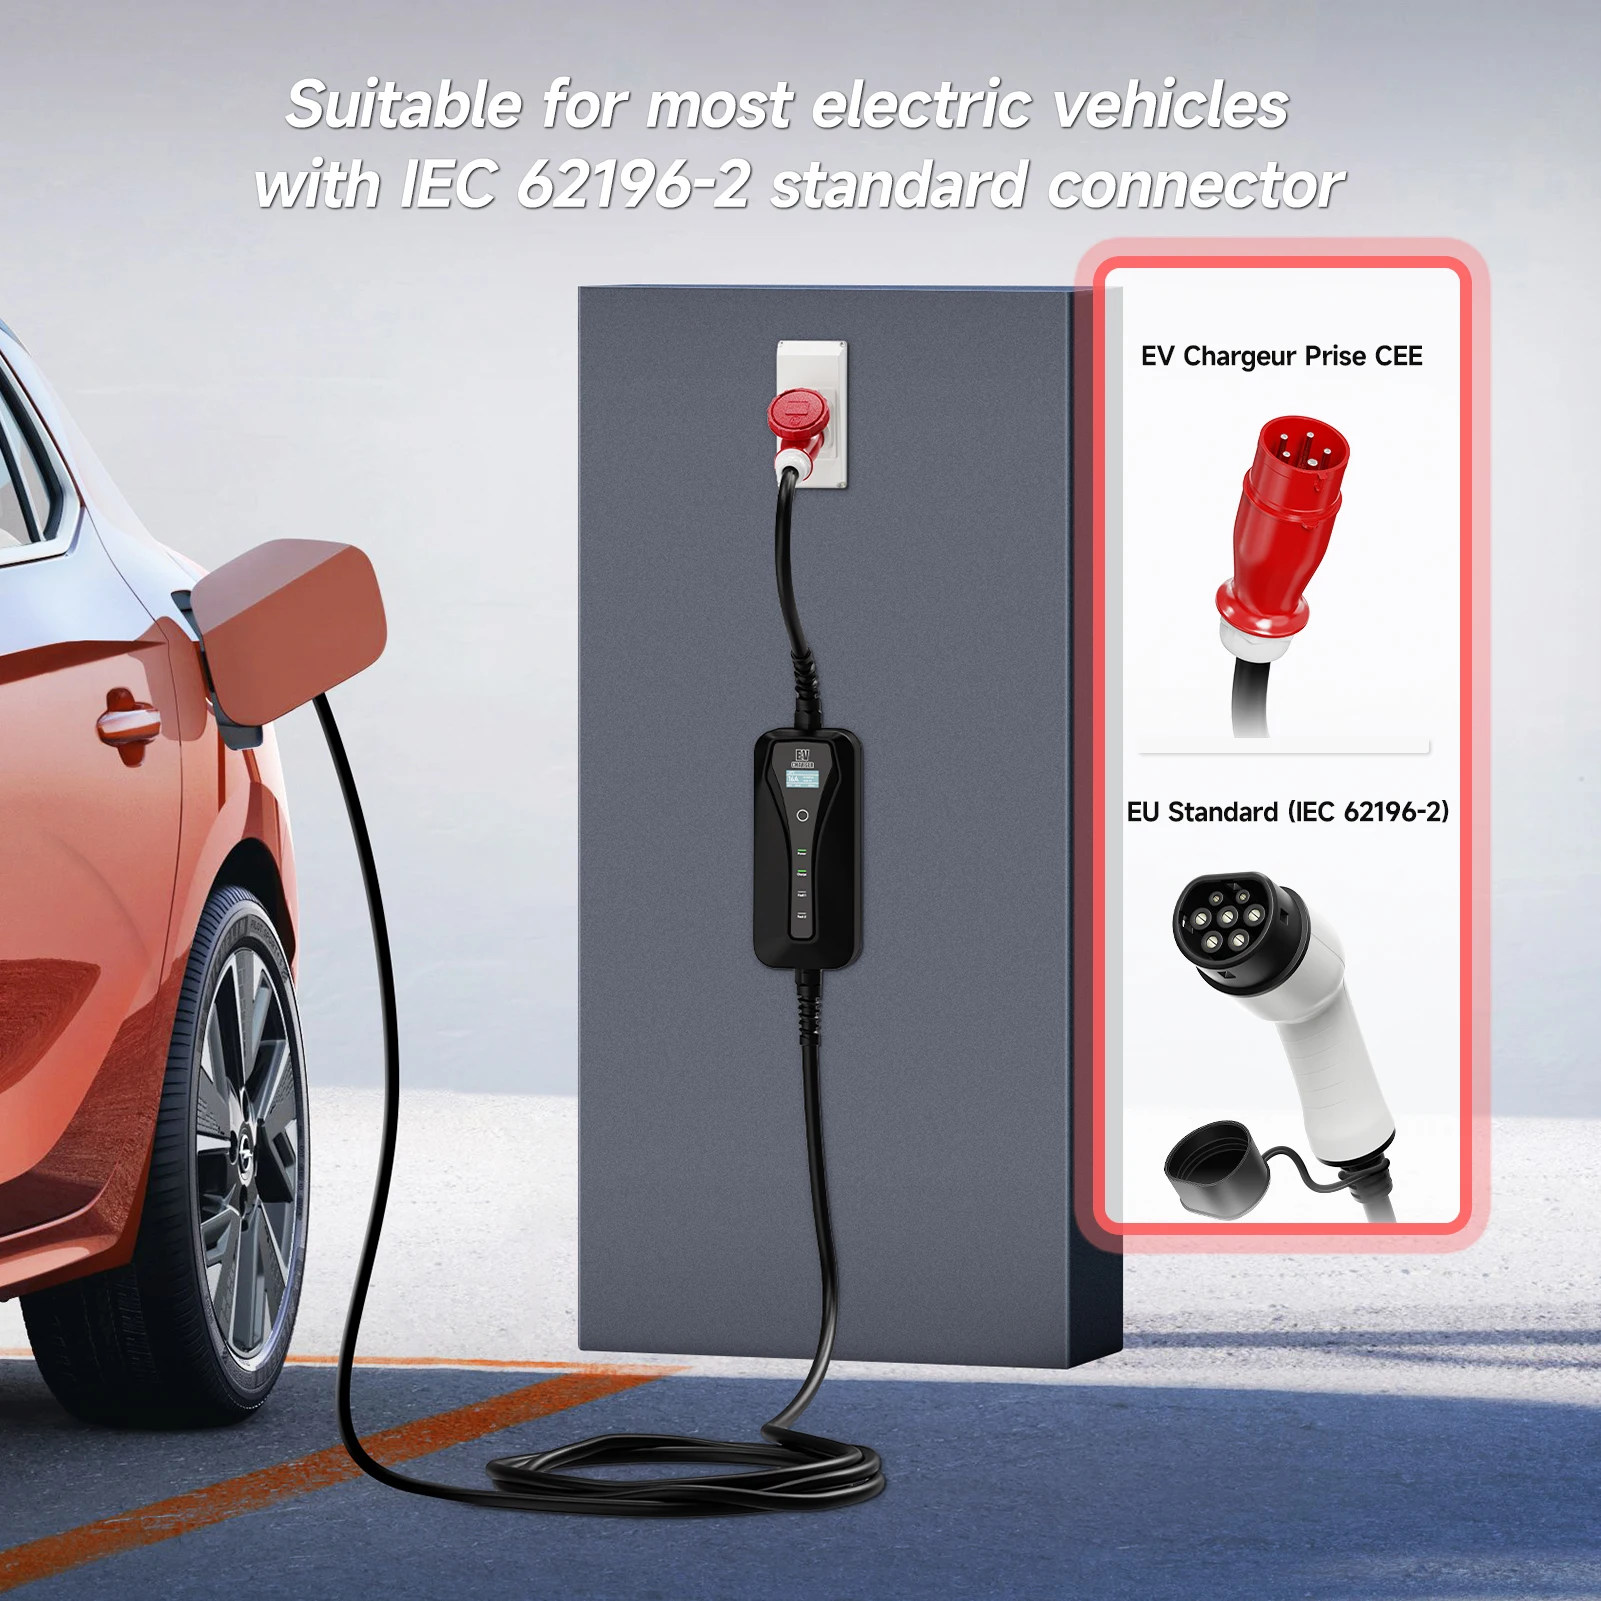 Portable Type2 EV Charger 11KW 16A - Travel-Friendly, High Security, Multi-Com - $183.04